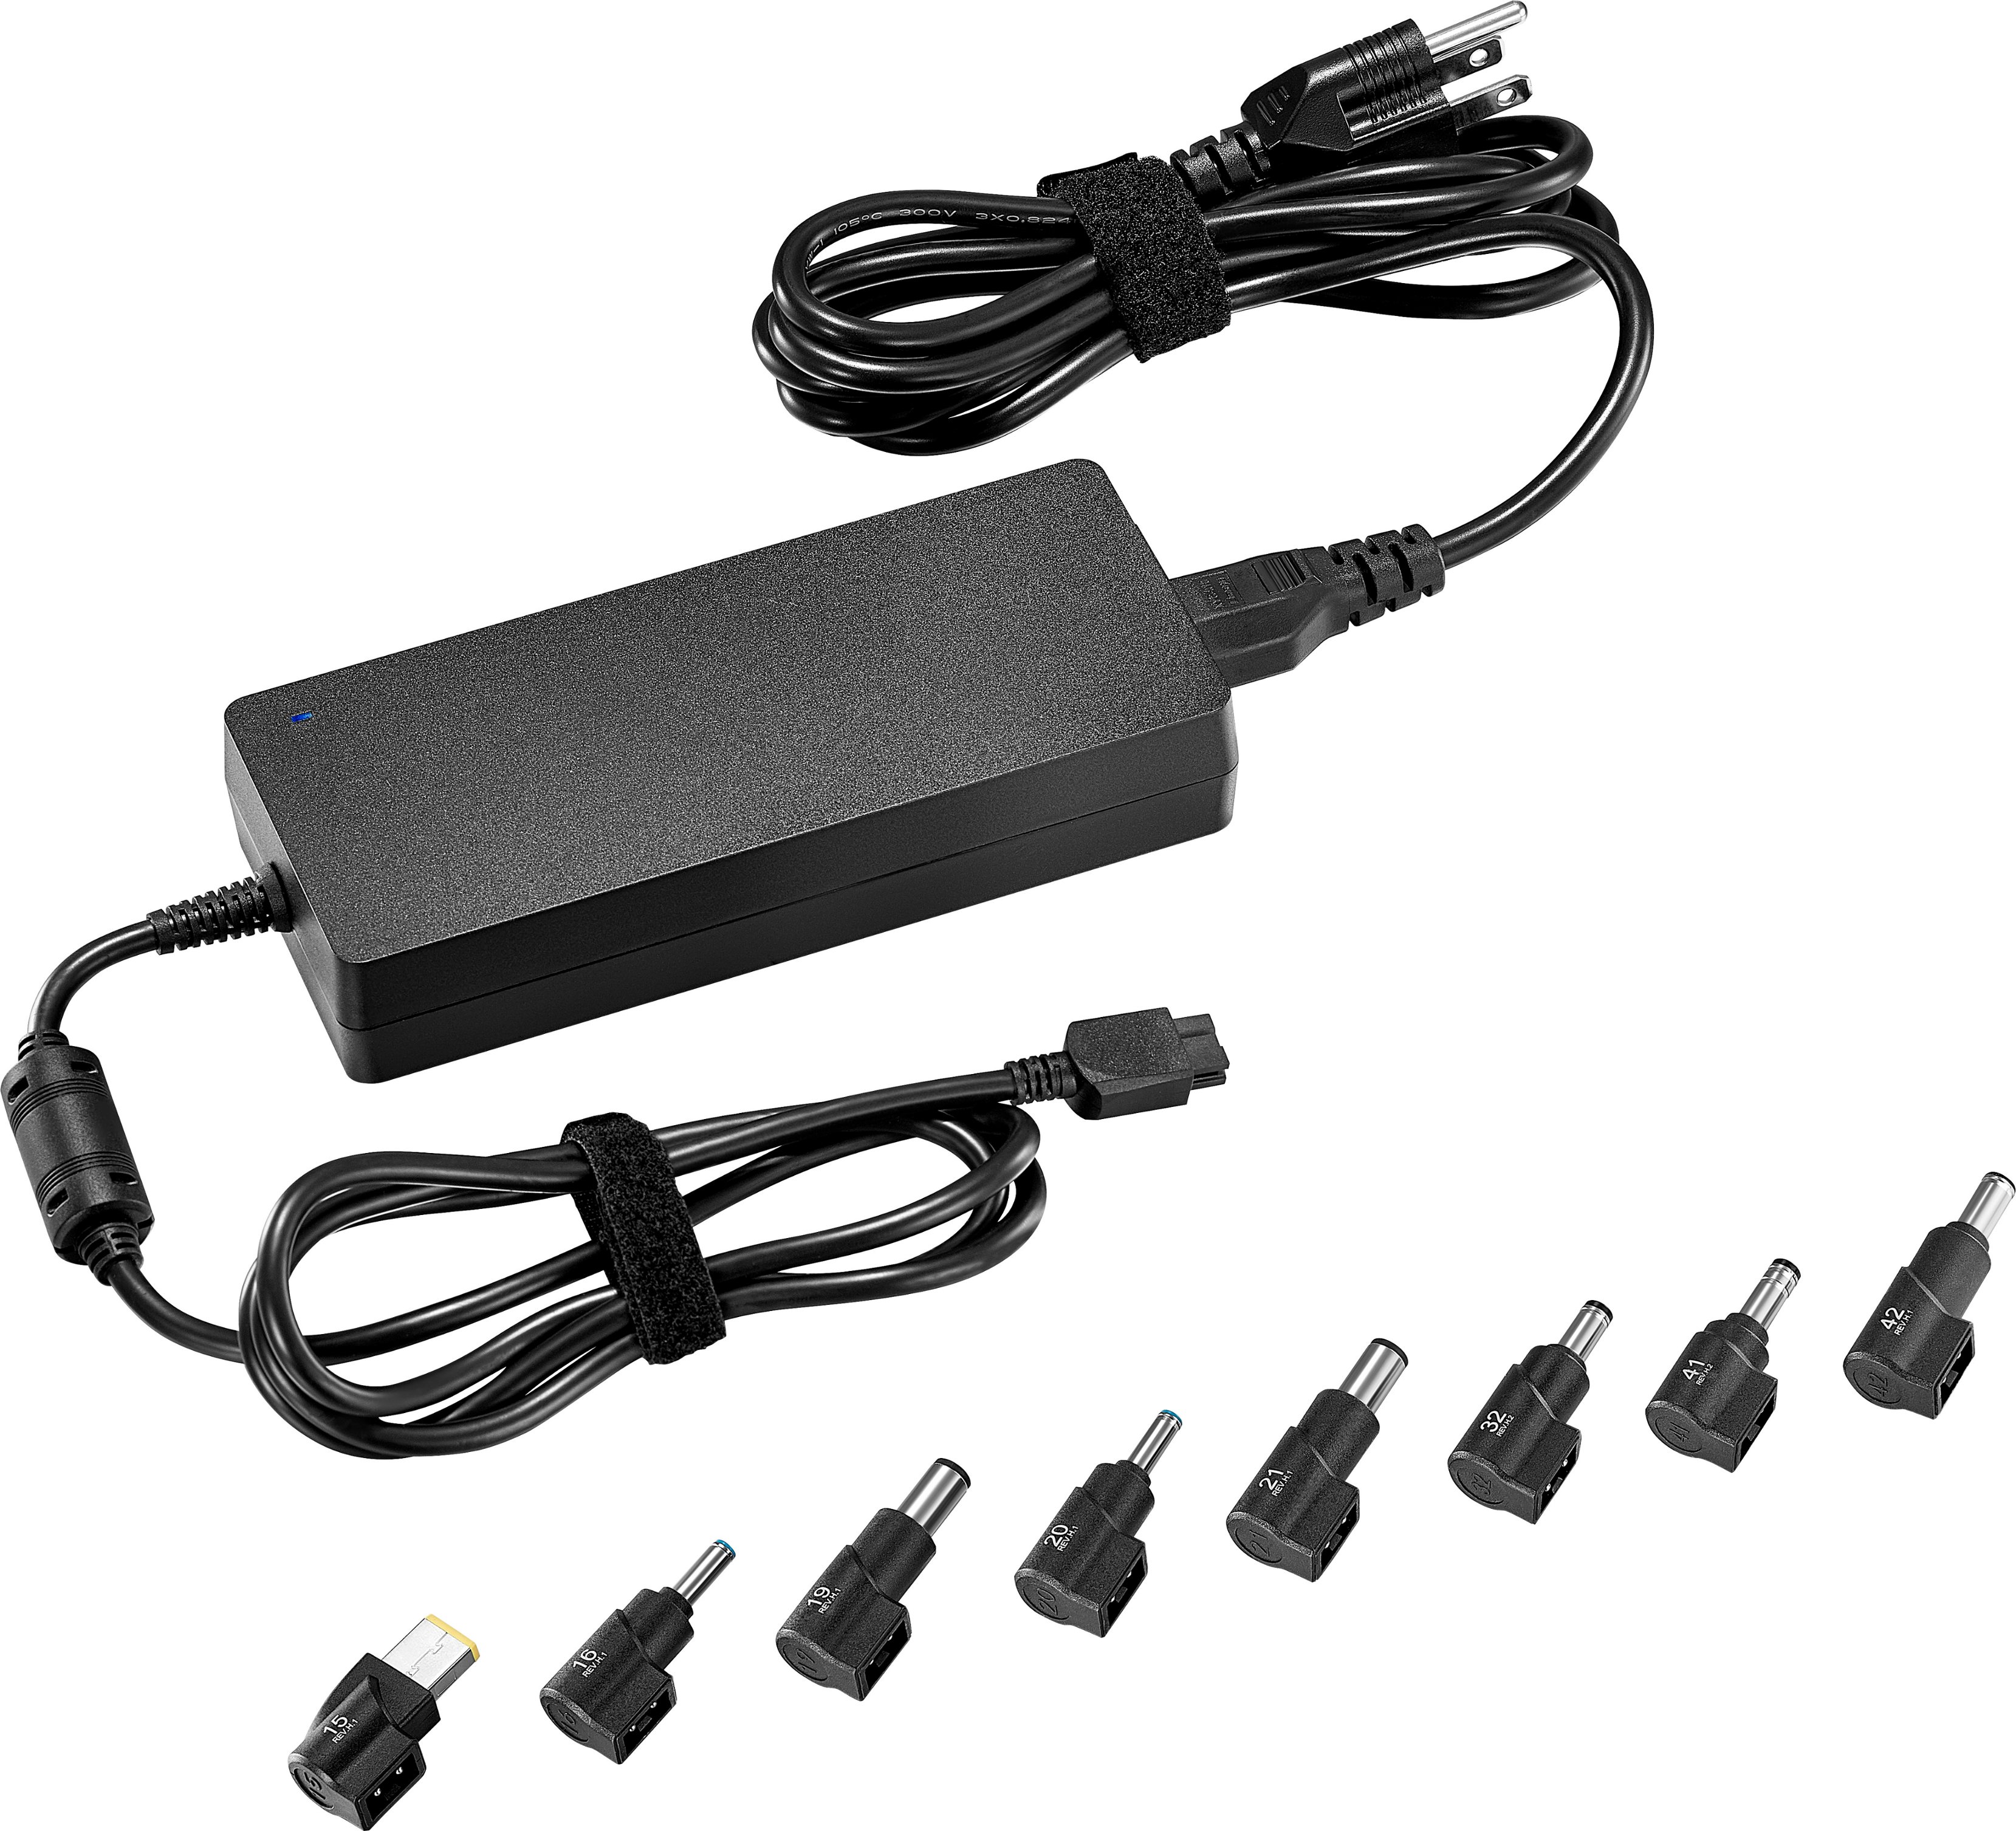 Insignia - Universal 180W High Power Laptop Charger - Black - New (Bb)